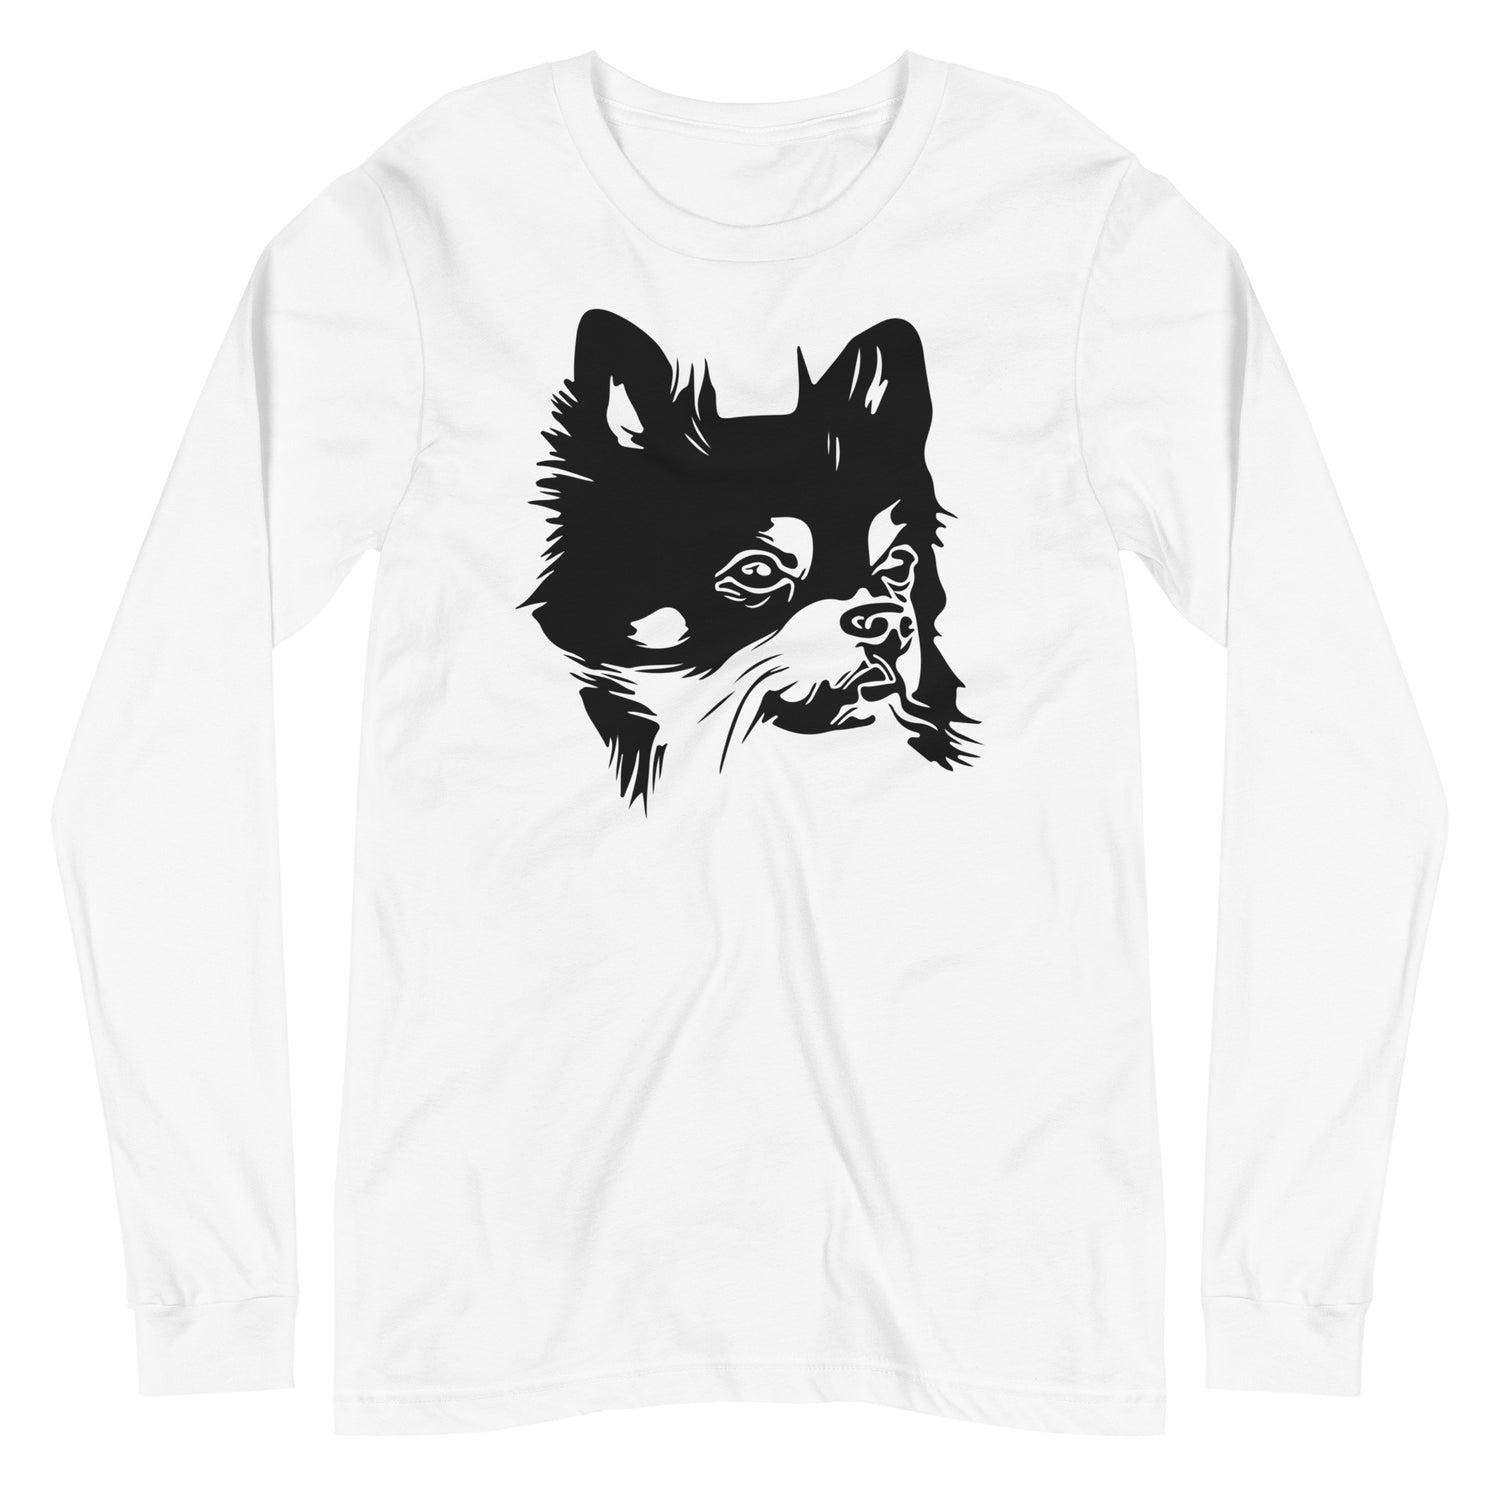 Black Chihuahua face silhouette looks sideways on unisex white long sleeve t-shirt